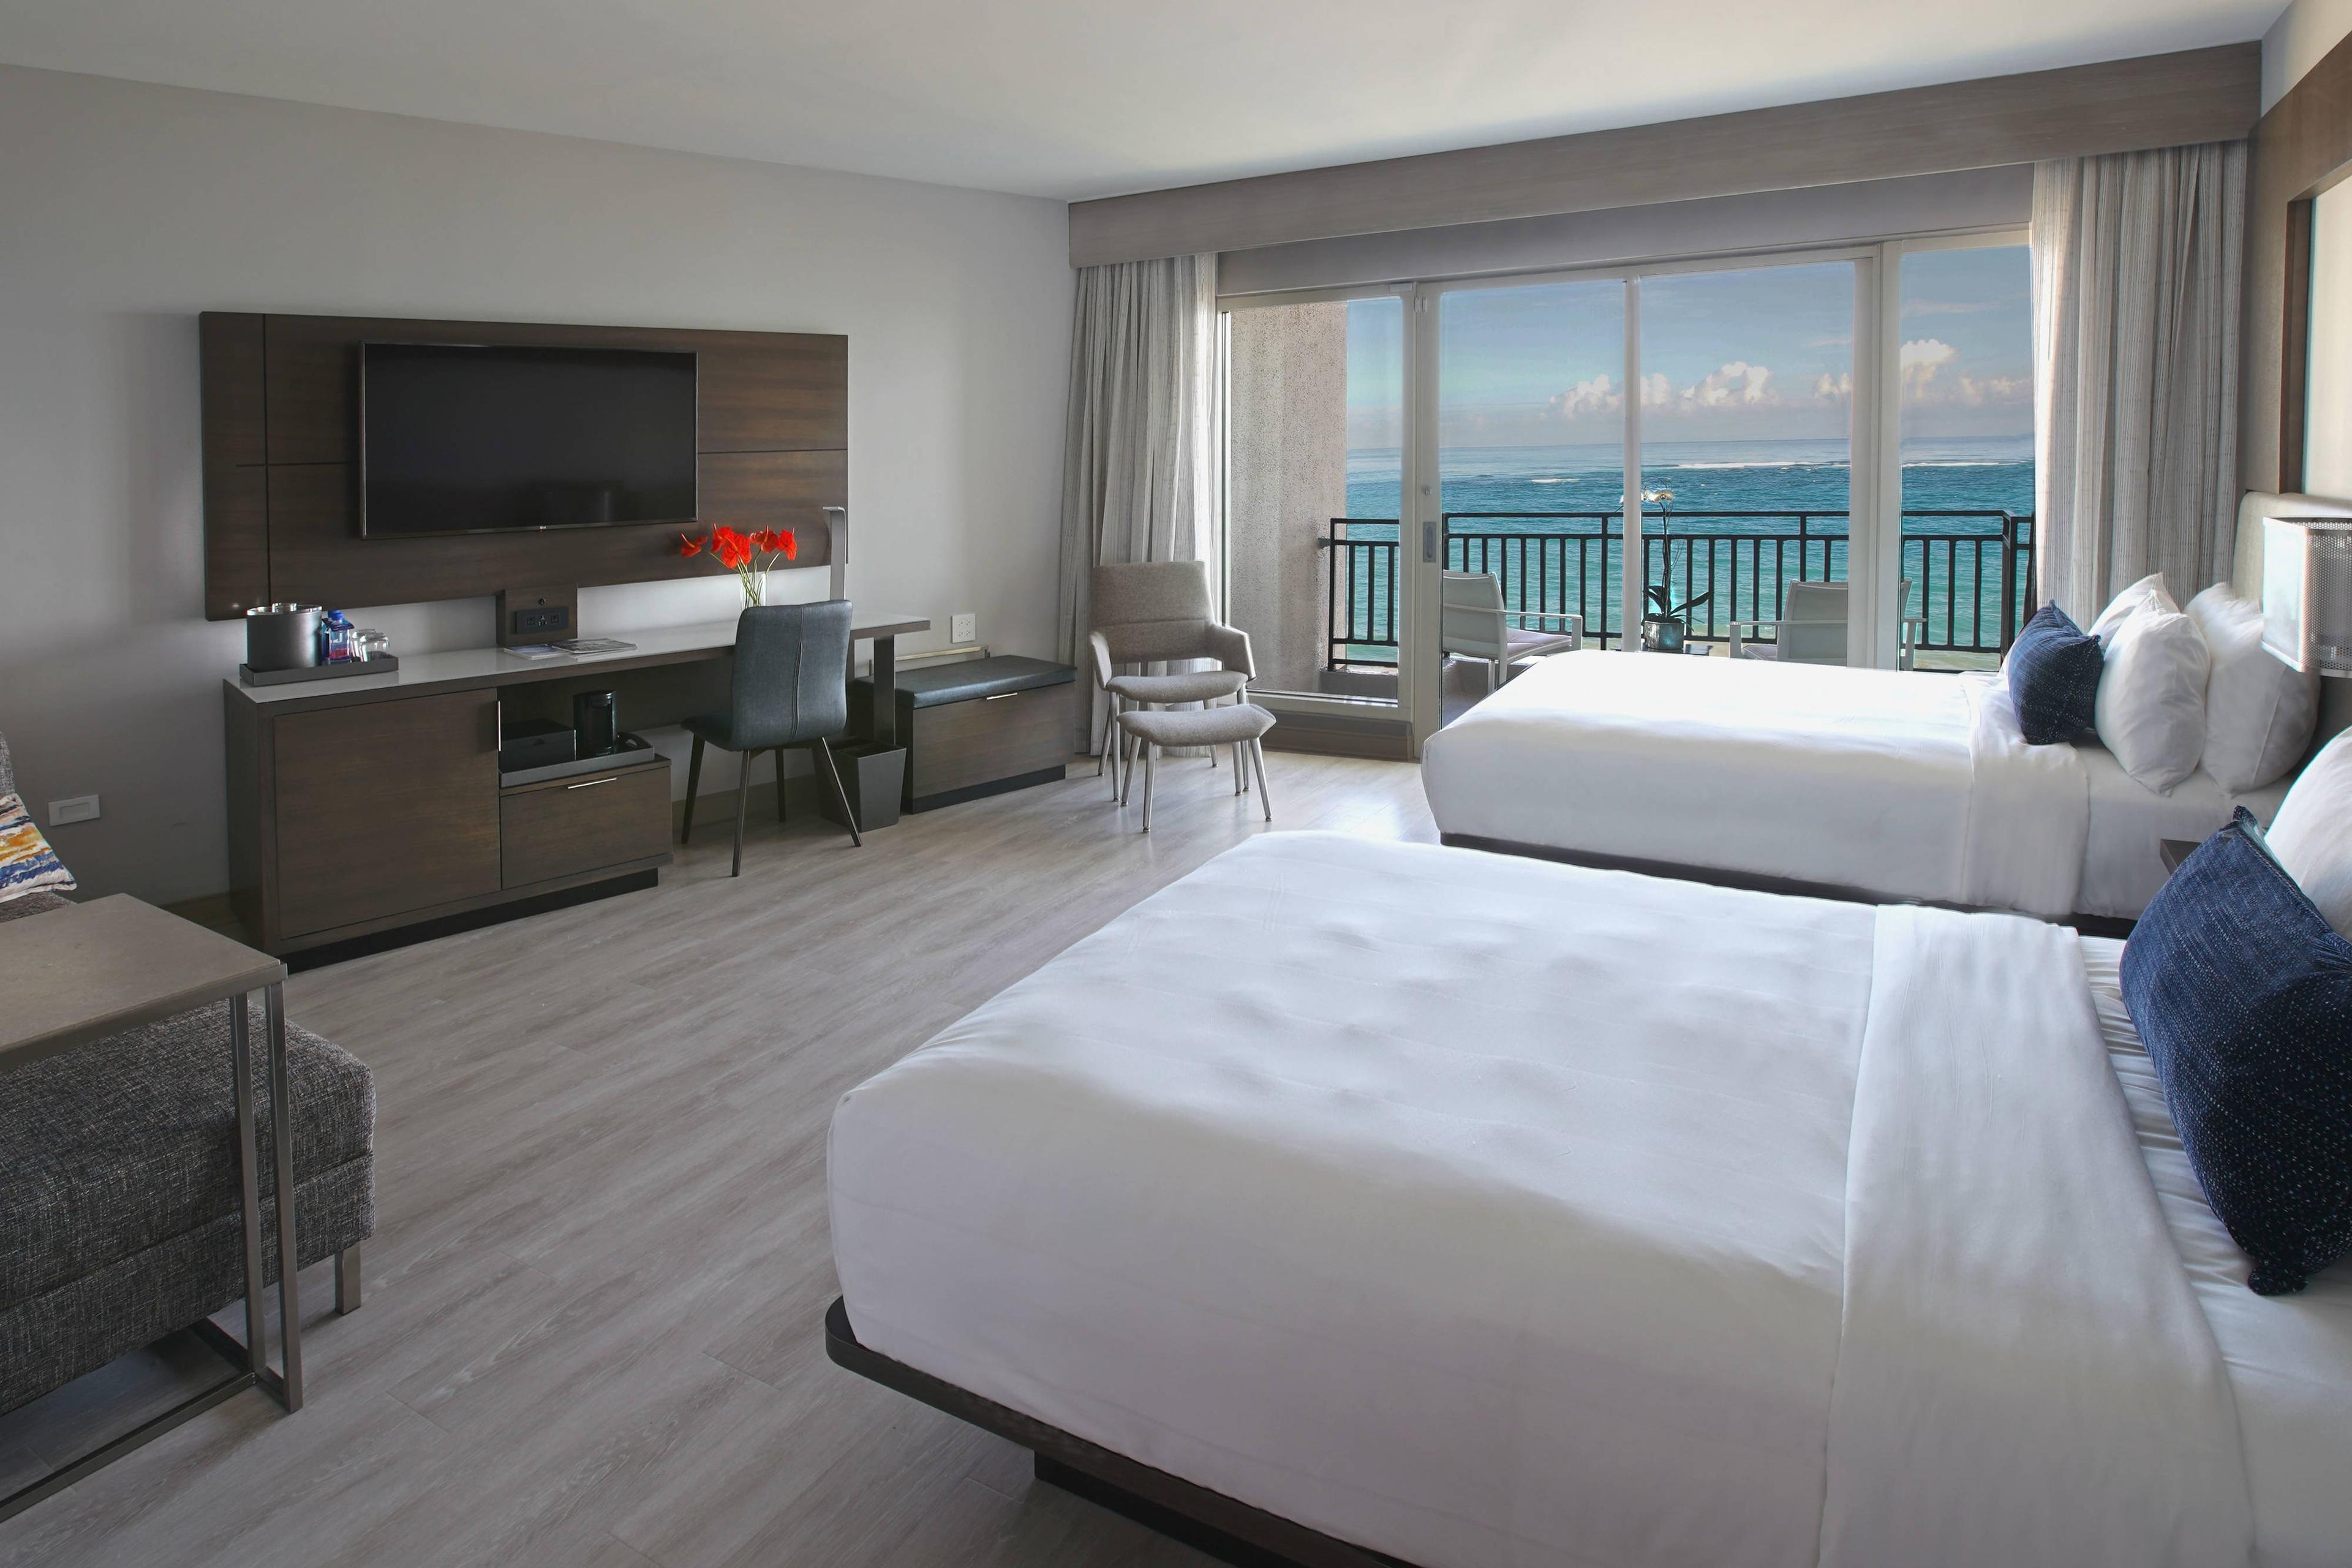 For your San Juan resort getaway, come with the whole family and relax in the comfort of our double/double bed cabana guest rooms. Our ocean views will keep you in vacation mode day and night.